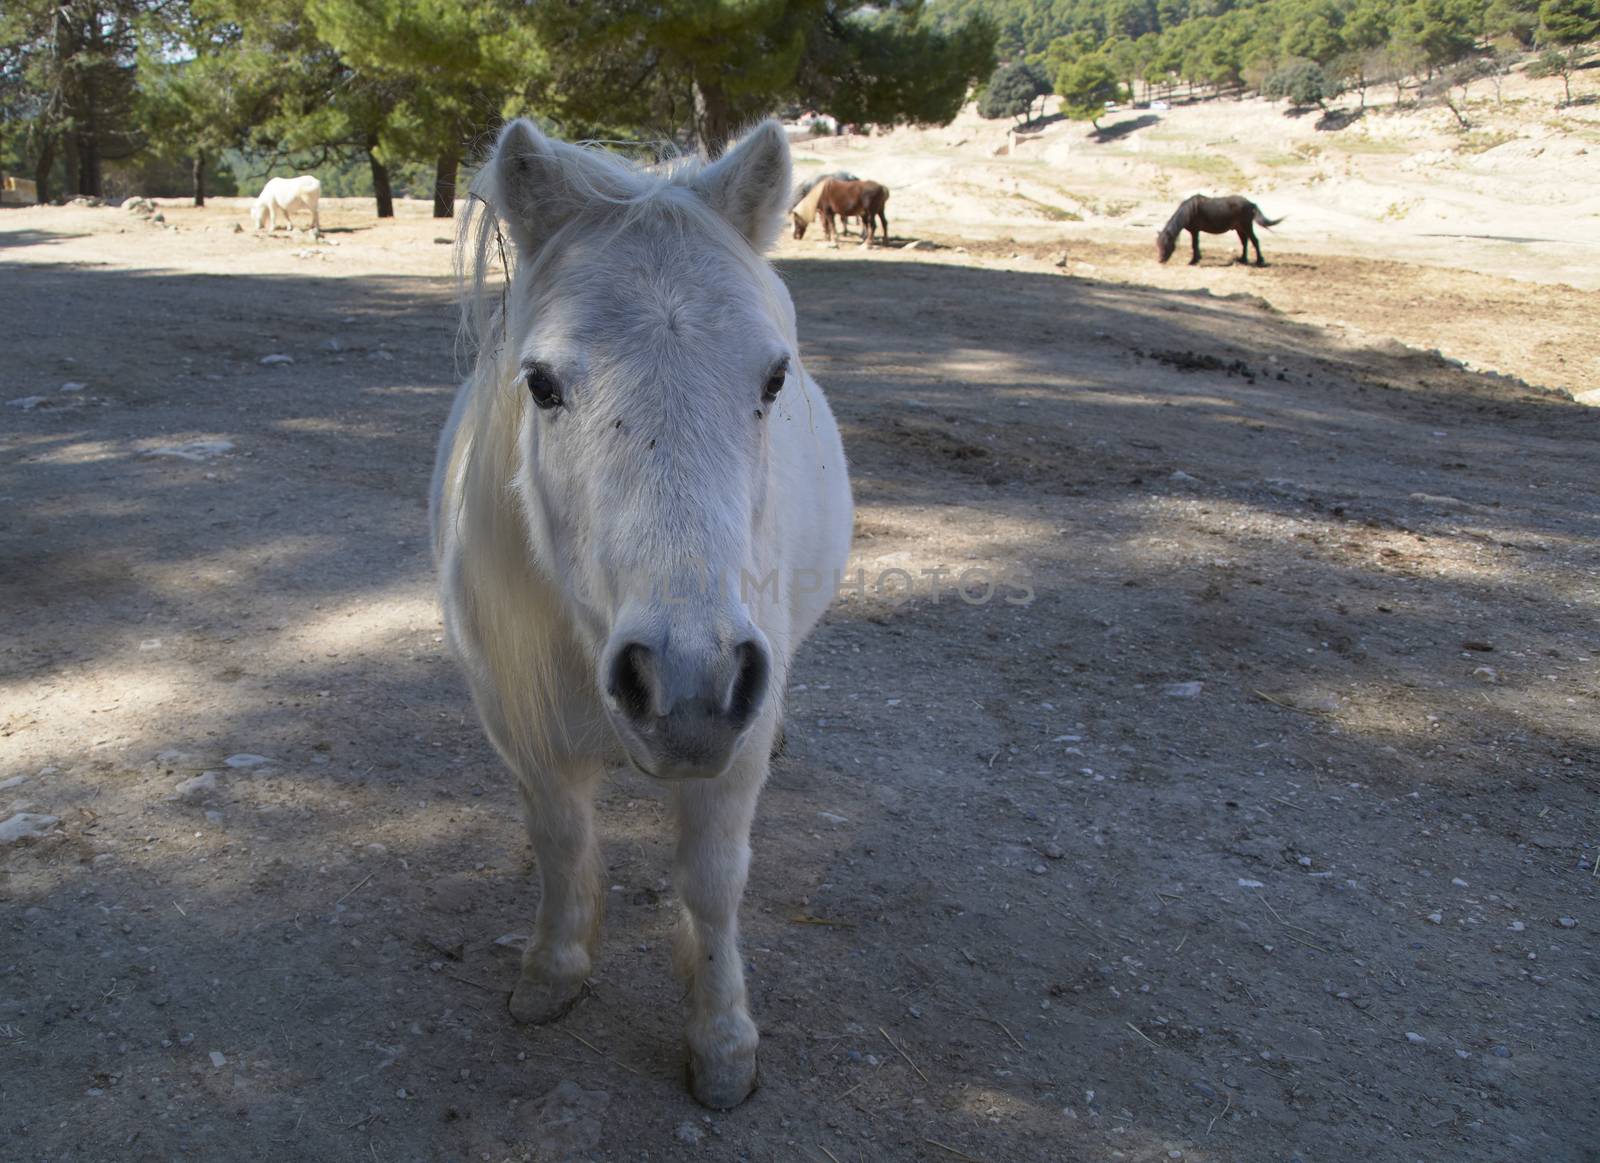 Curious little white donkey ready to play by raul_ruiz